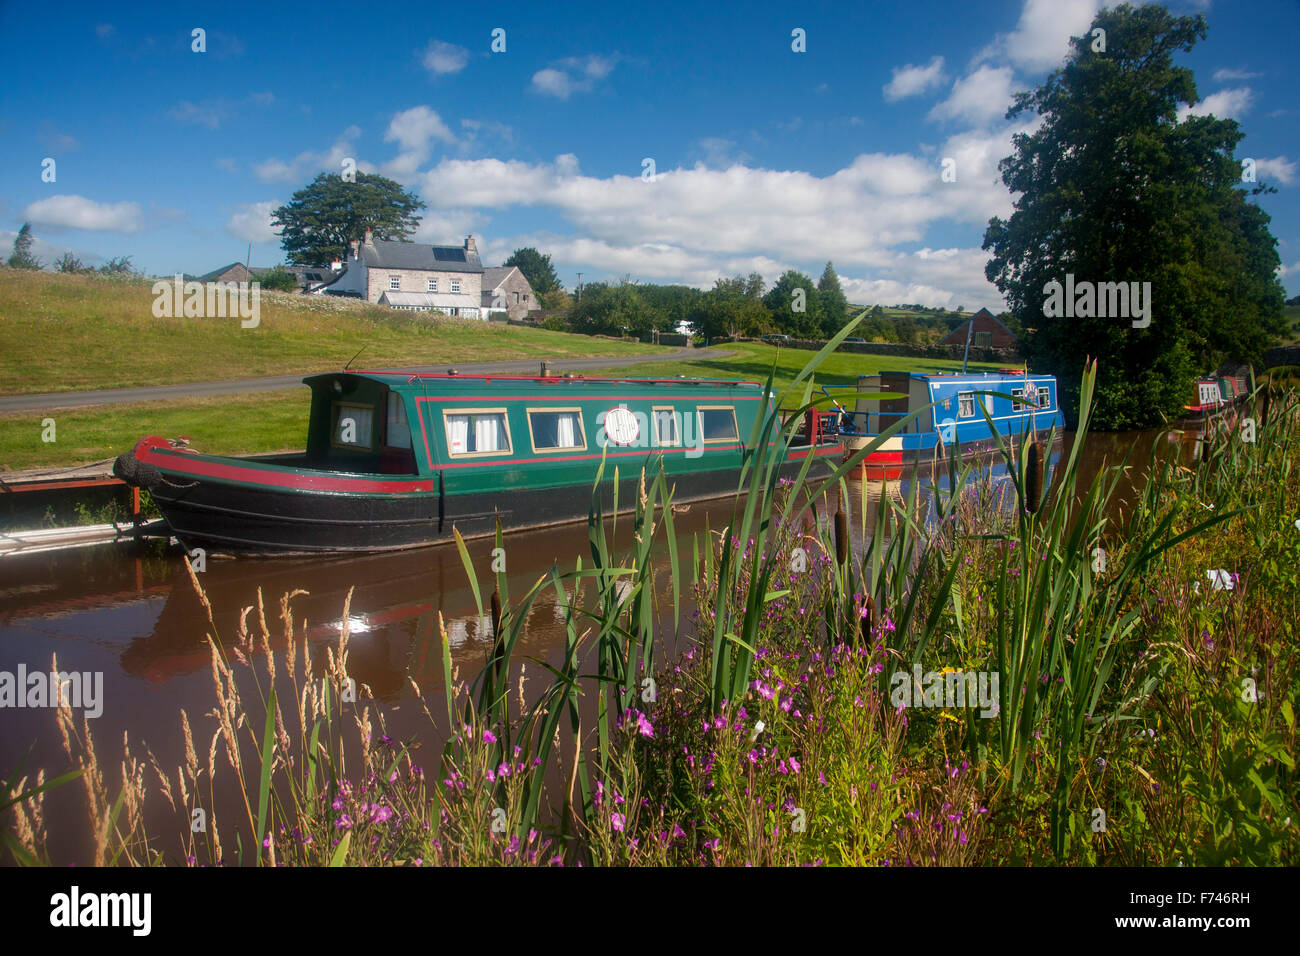 Monmouthshire & Brecon Canal boats moored at Pencelli house or farmhouse in background Powys Wales UK Stock Photo